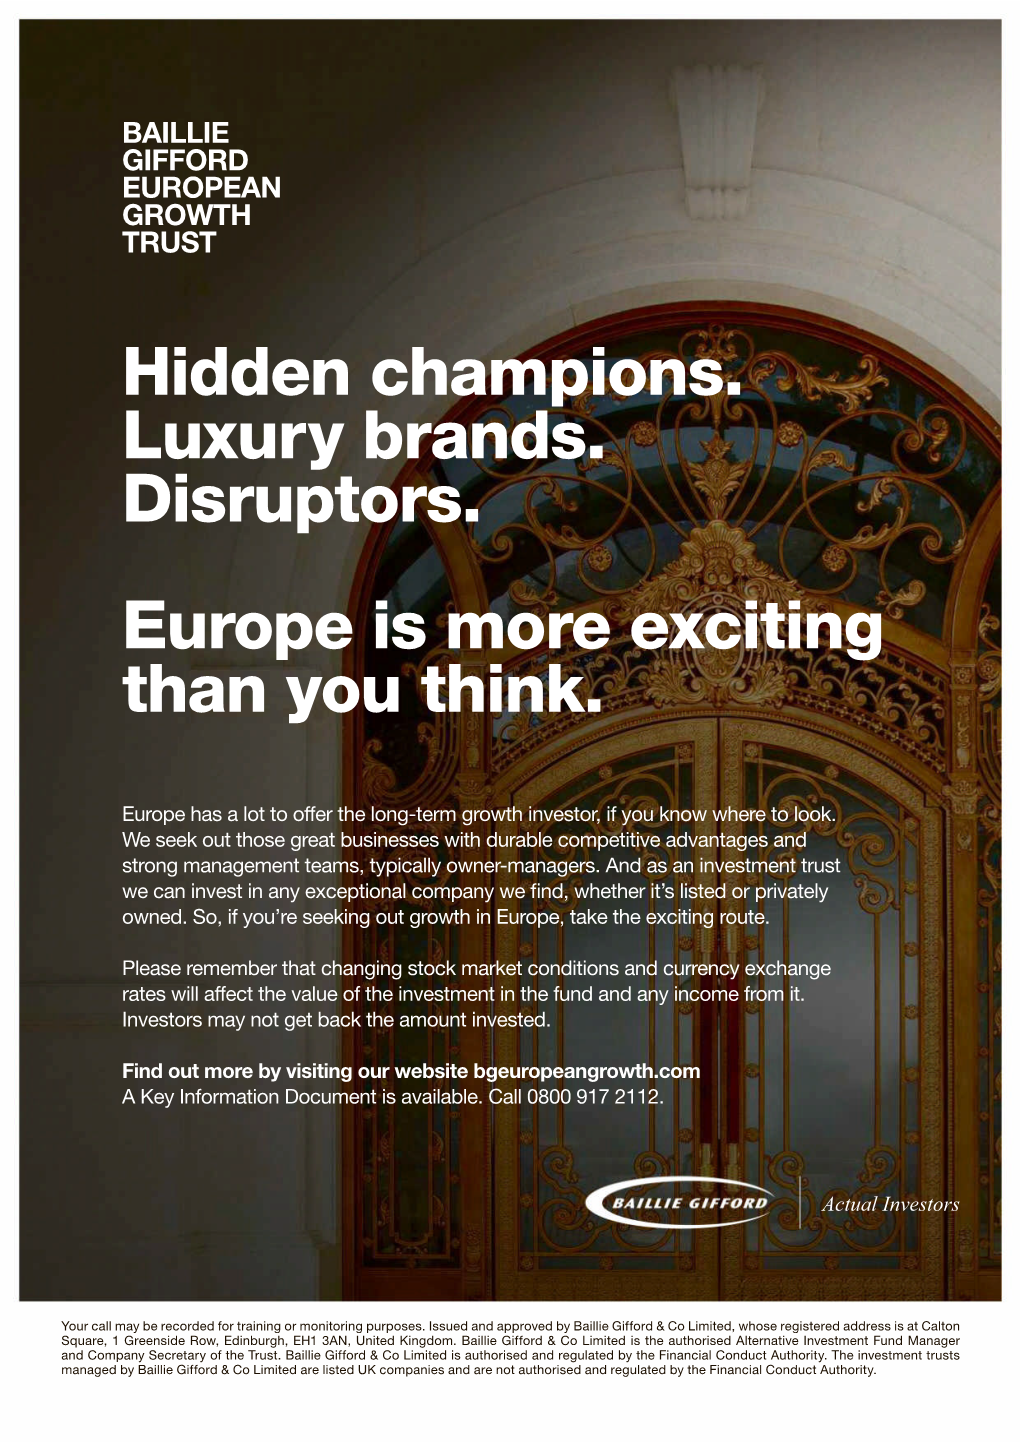 Hidden Champions. Luxury Brands. Disruptors. Europe Is More Exciting Than You Think